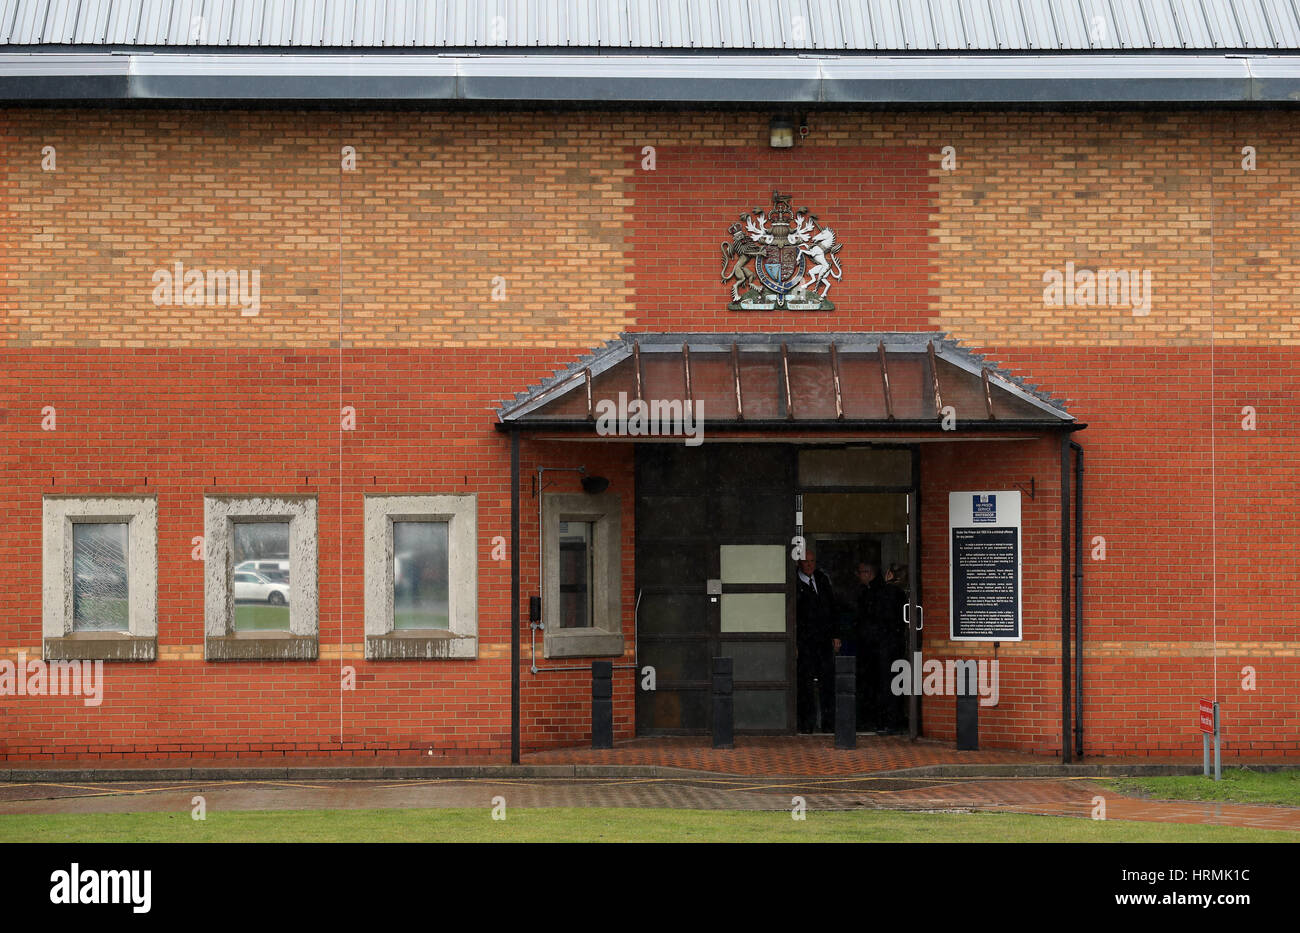 A general view of HMP Whitemoor, a maximum security prison for men in Category A and B, in March, Cambridgeshire. Stock Photo